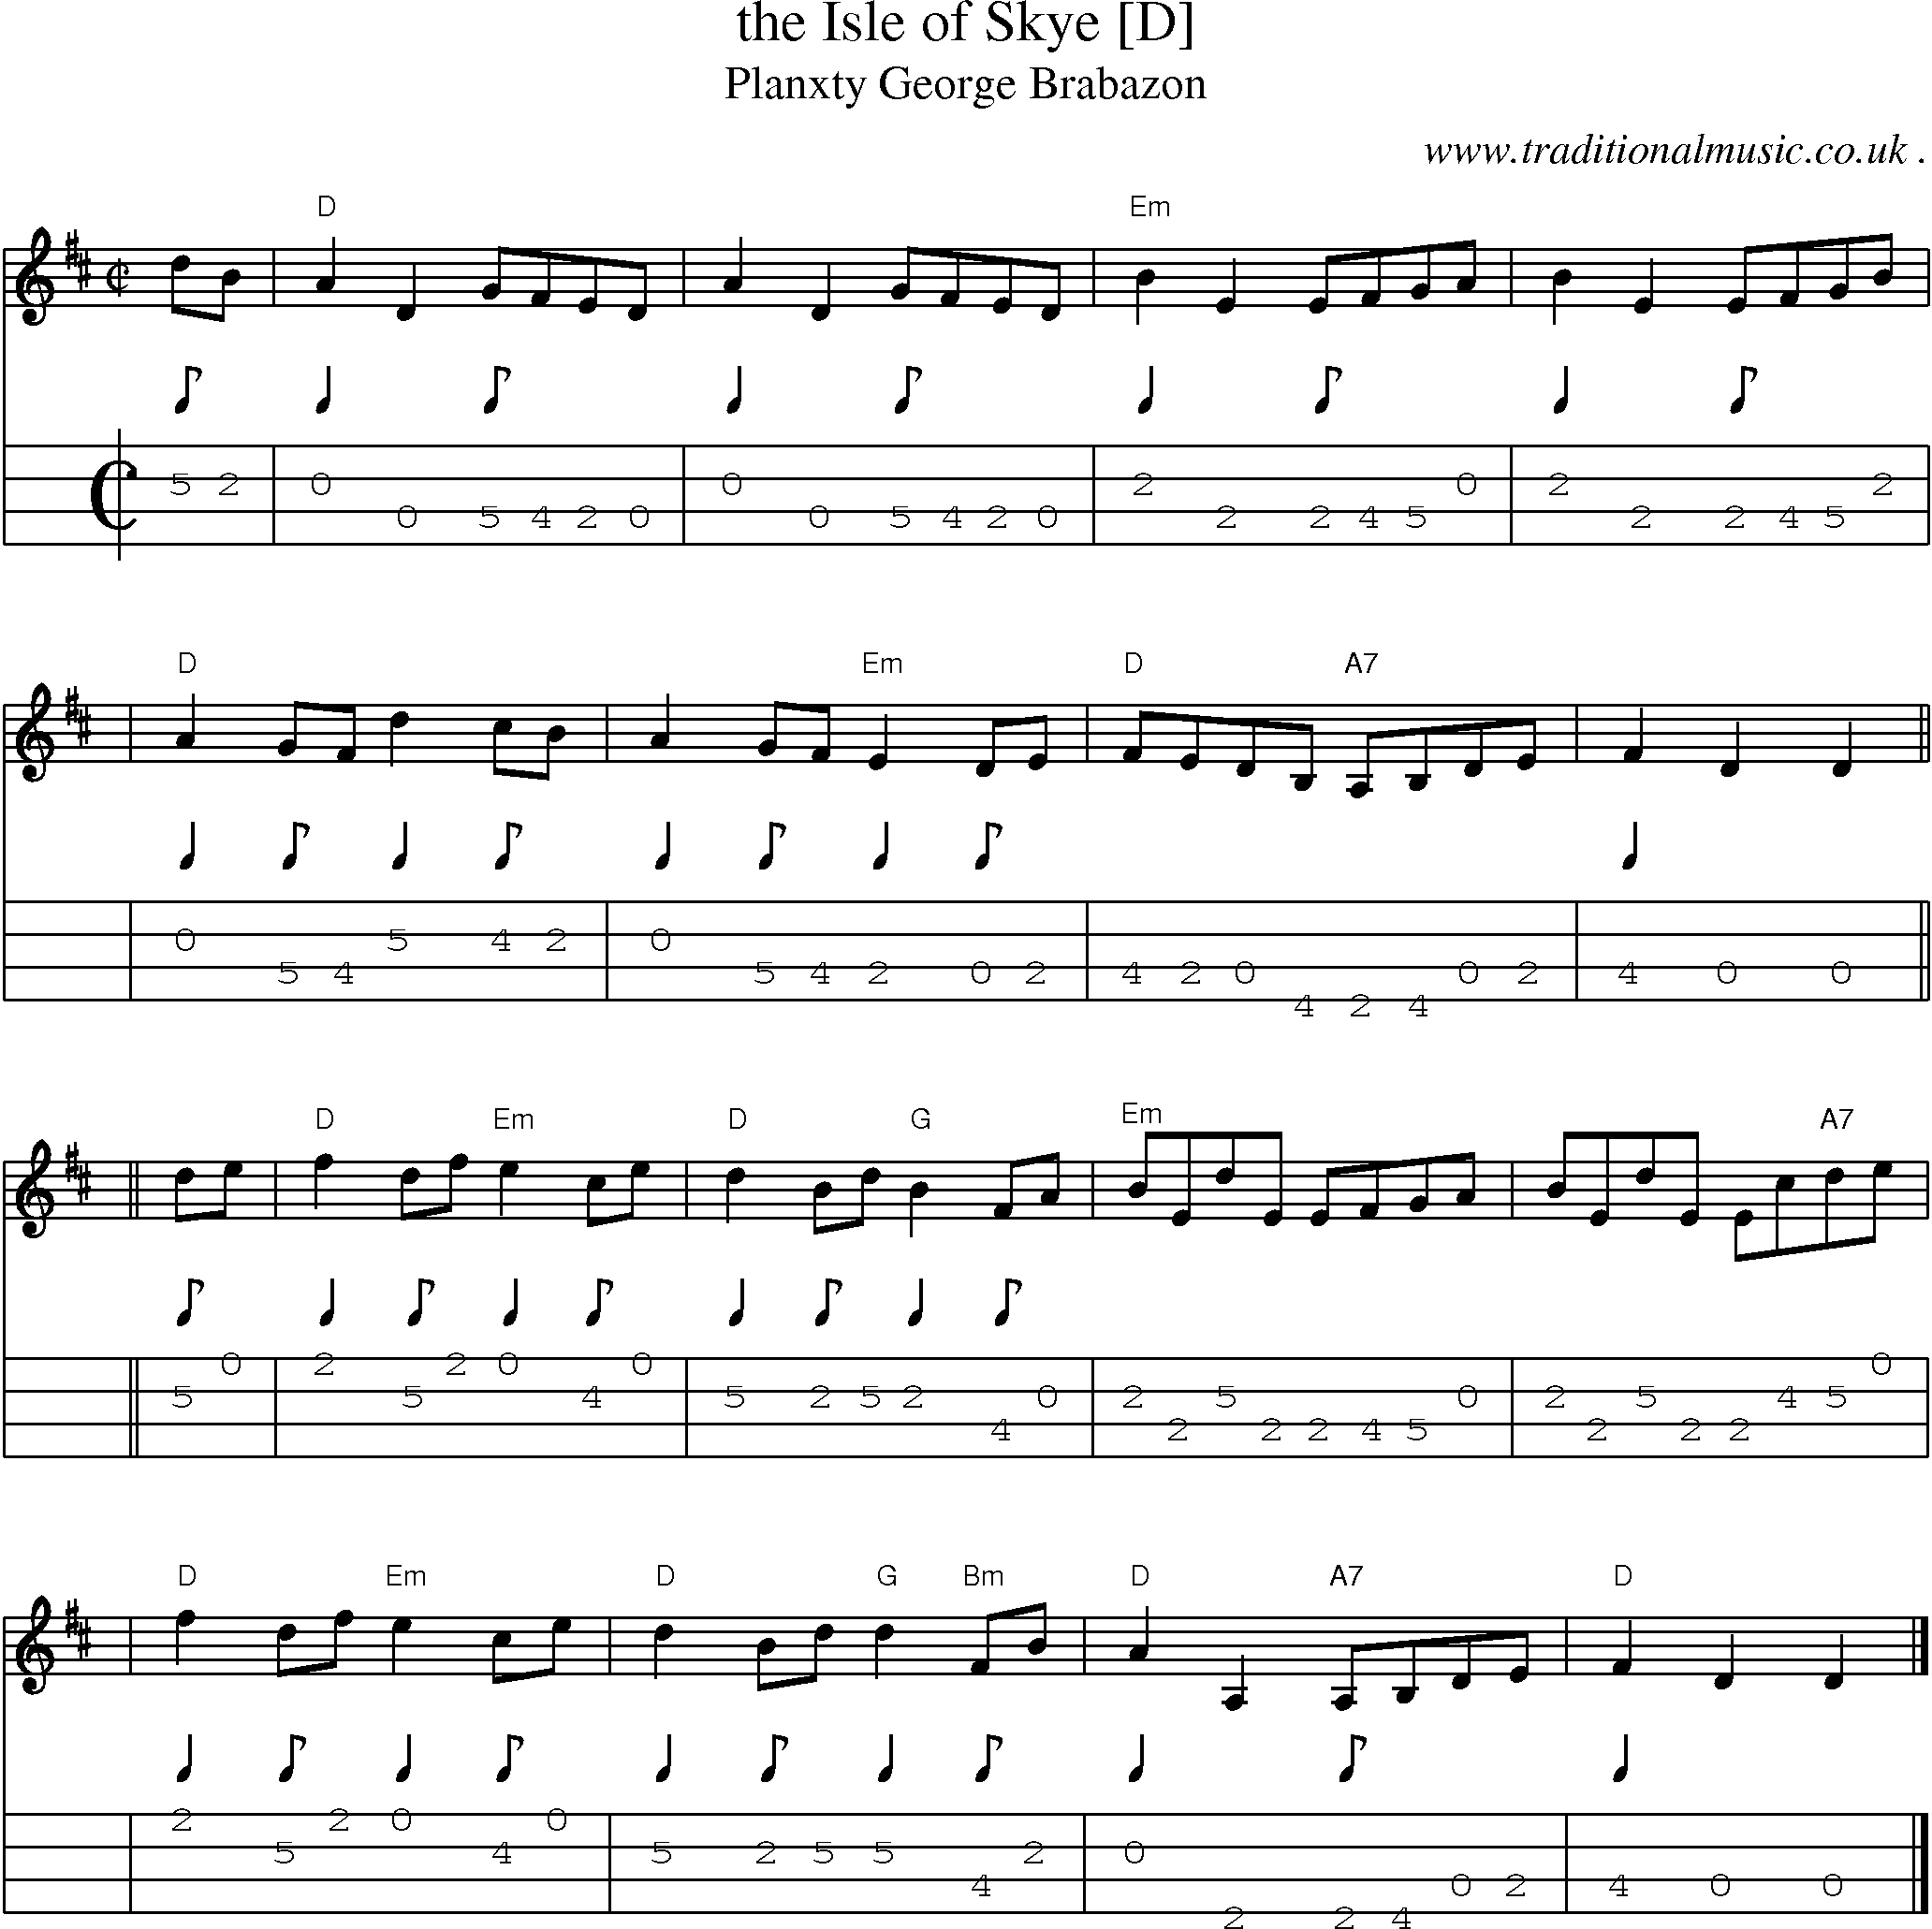 Sheet-music  score, Chords and Mandolin Tabs for The Isle Of Skye [d]